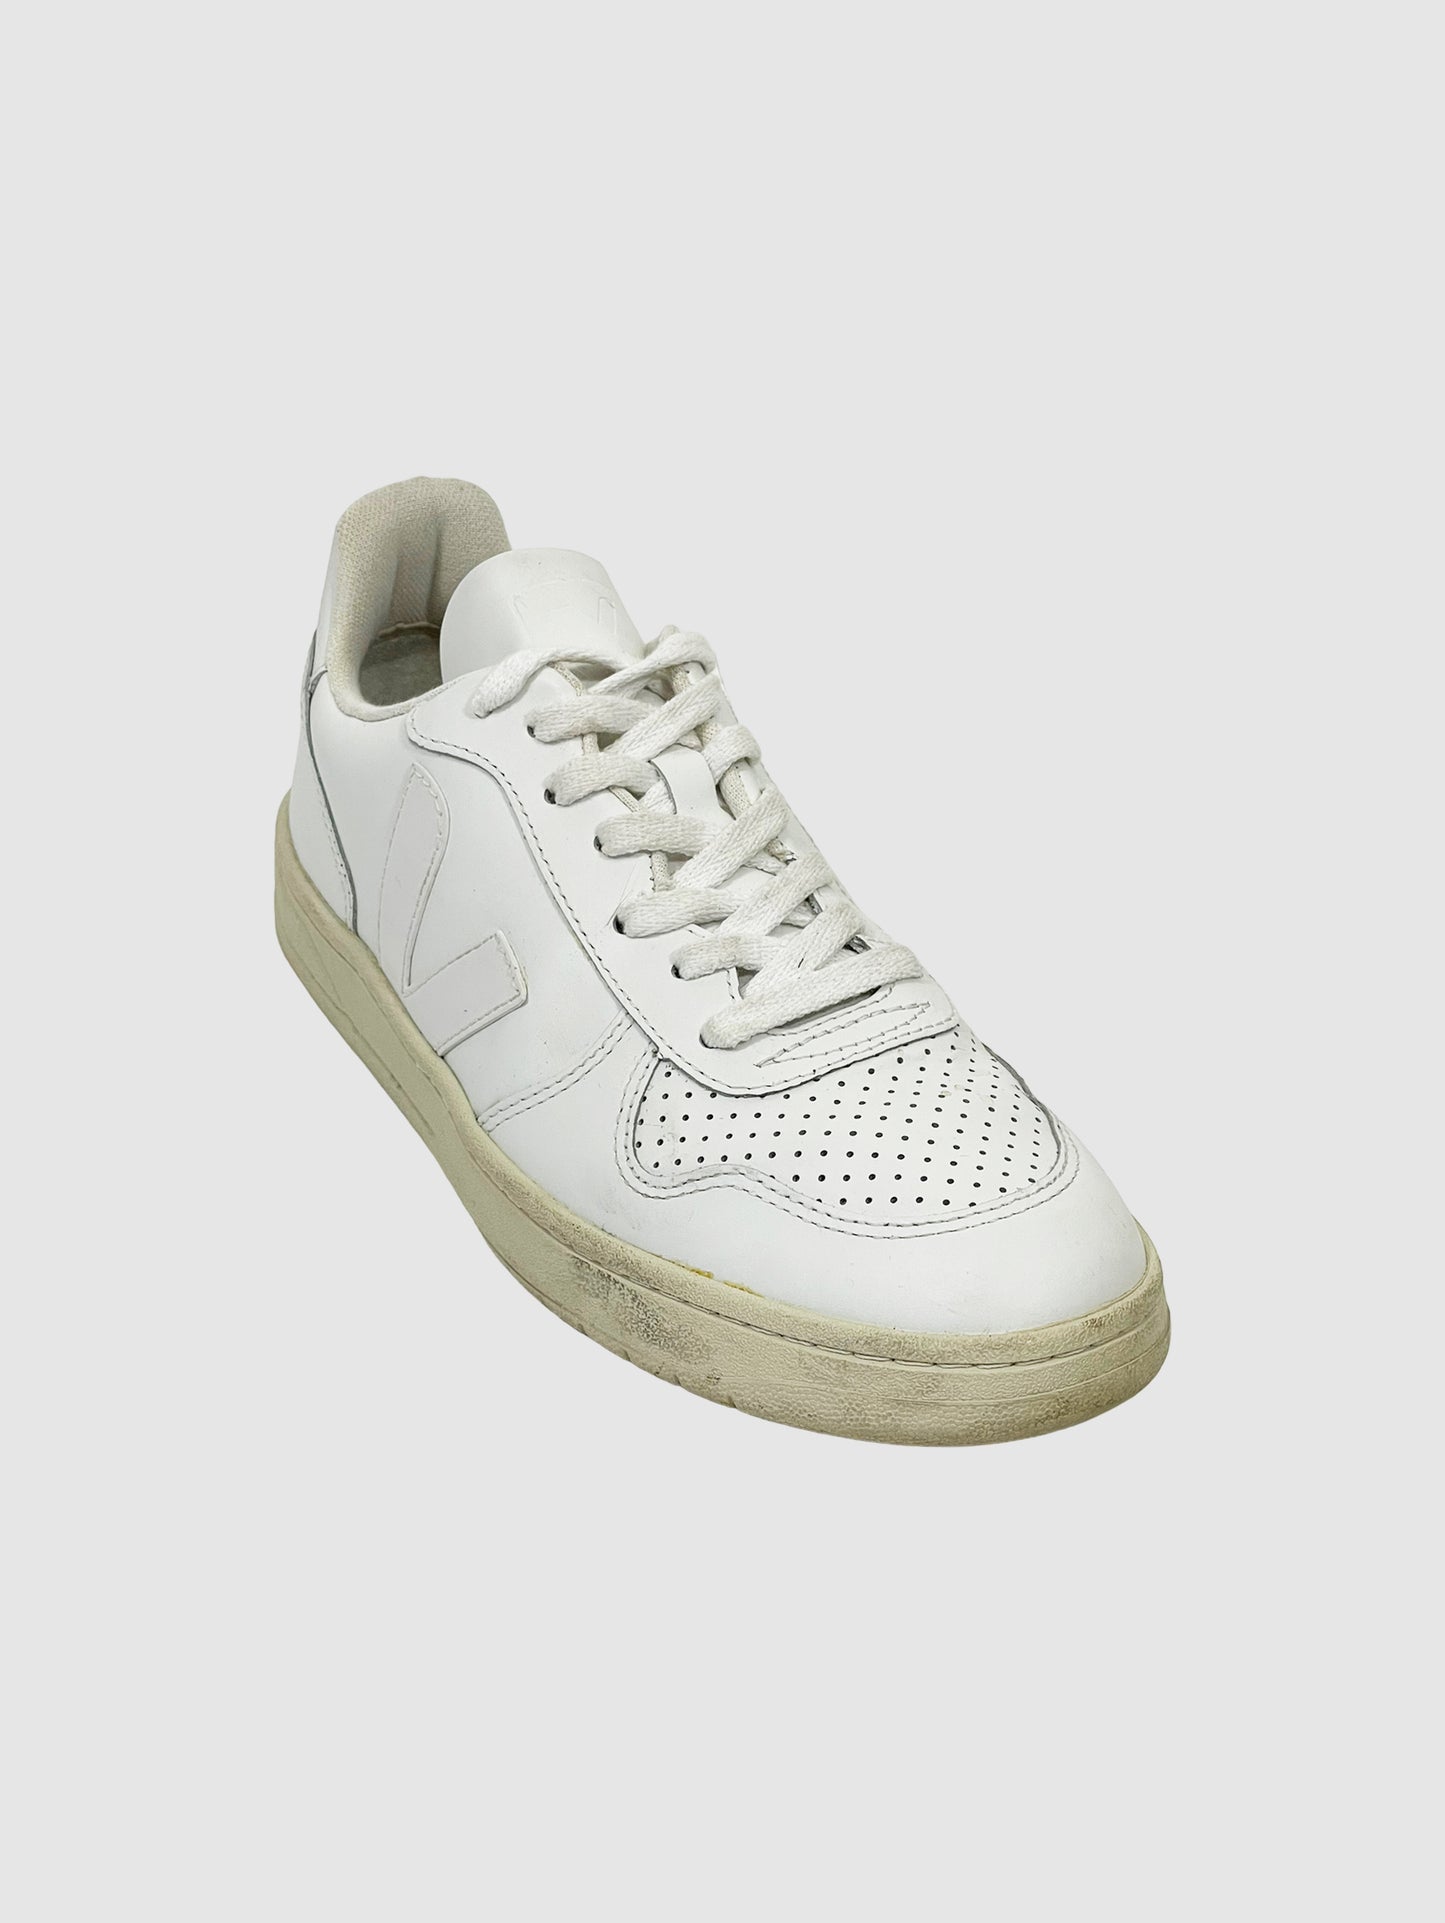 Veja Low Top Sneakers - Size 8